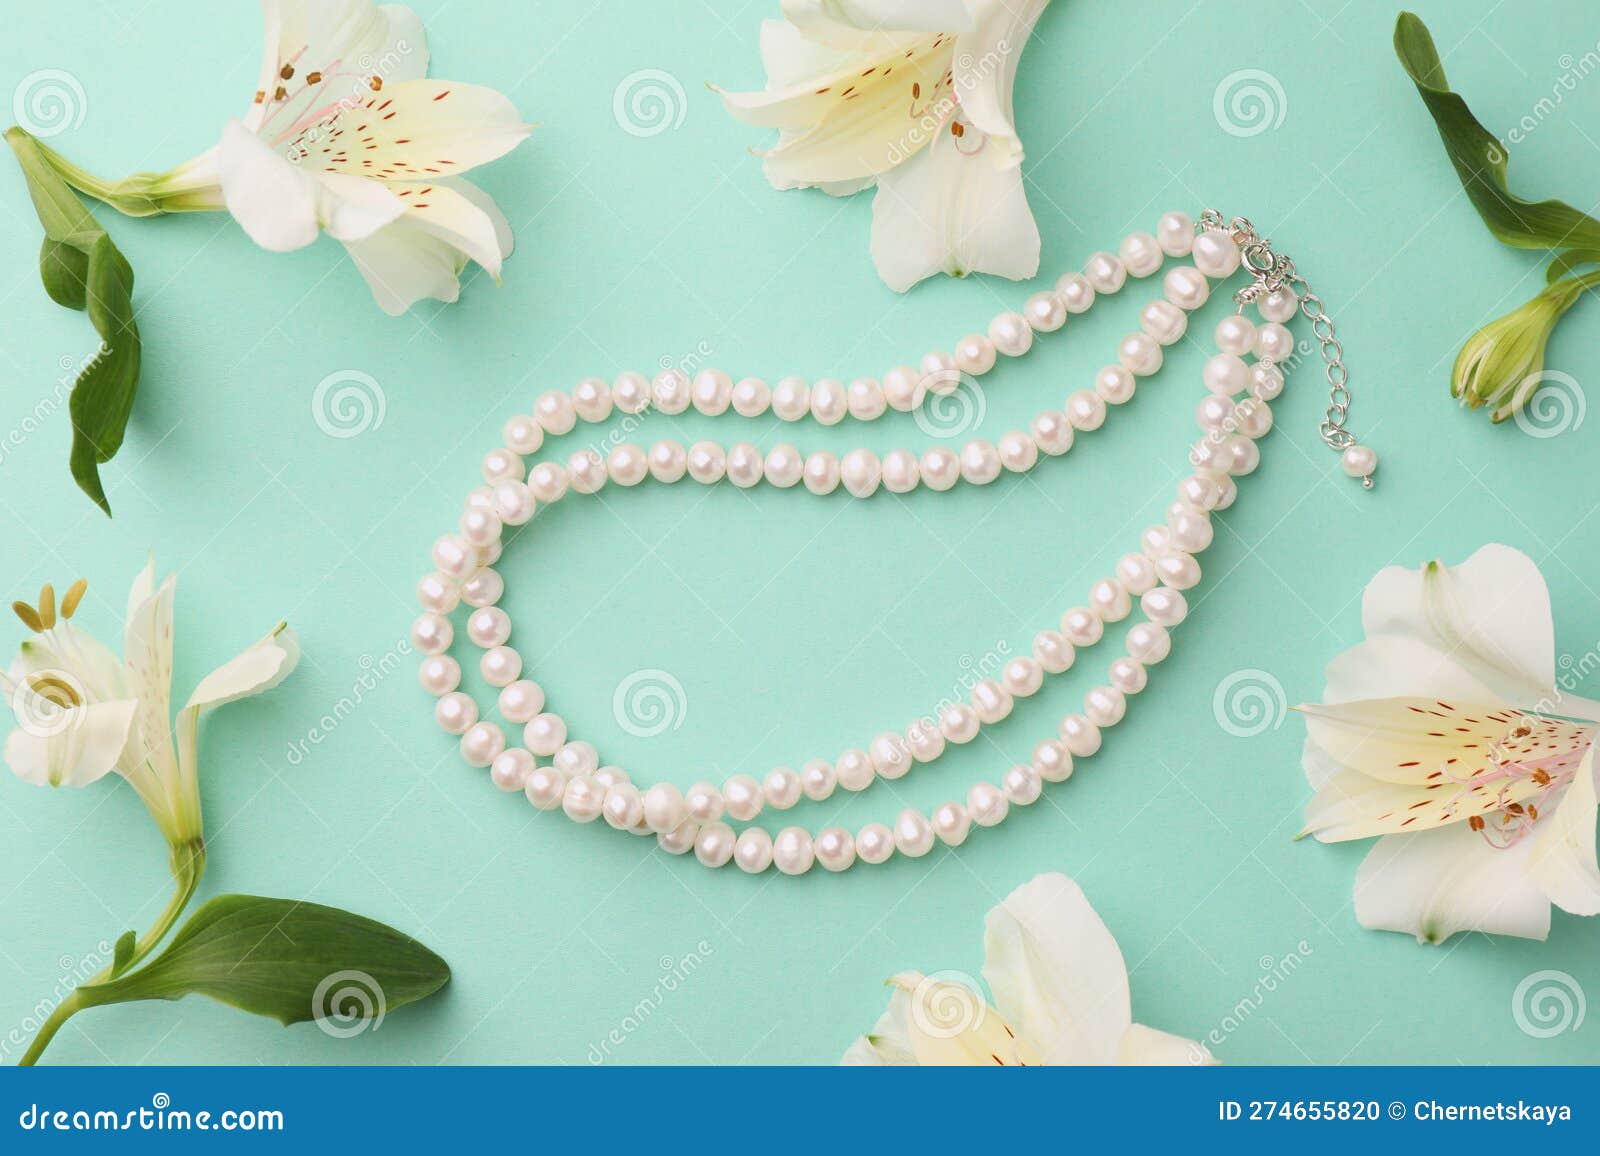 Premium Photo | White flowers, pearls necklace, perfume, greeting card on  white.accessories and flowers. online shopping or dating concept with copy  space.